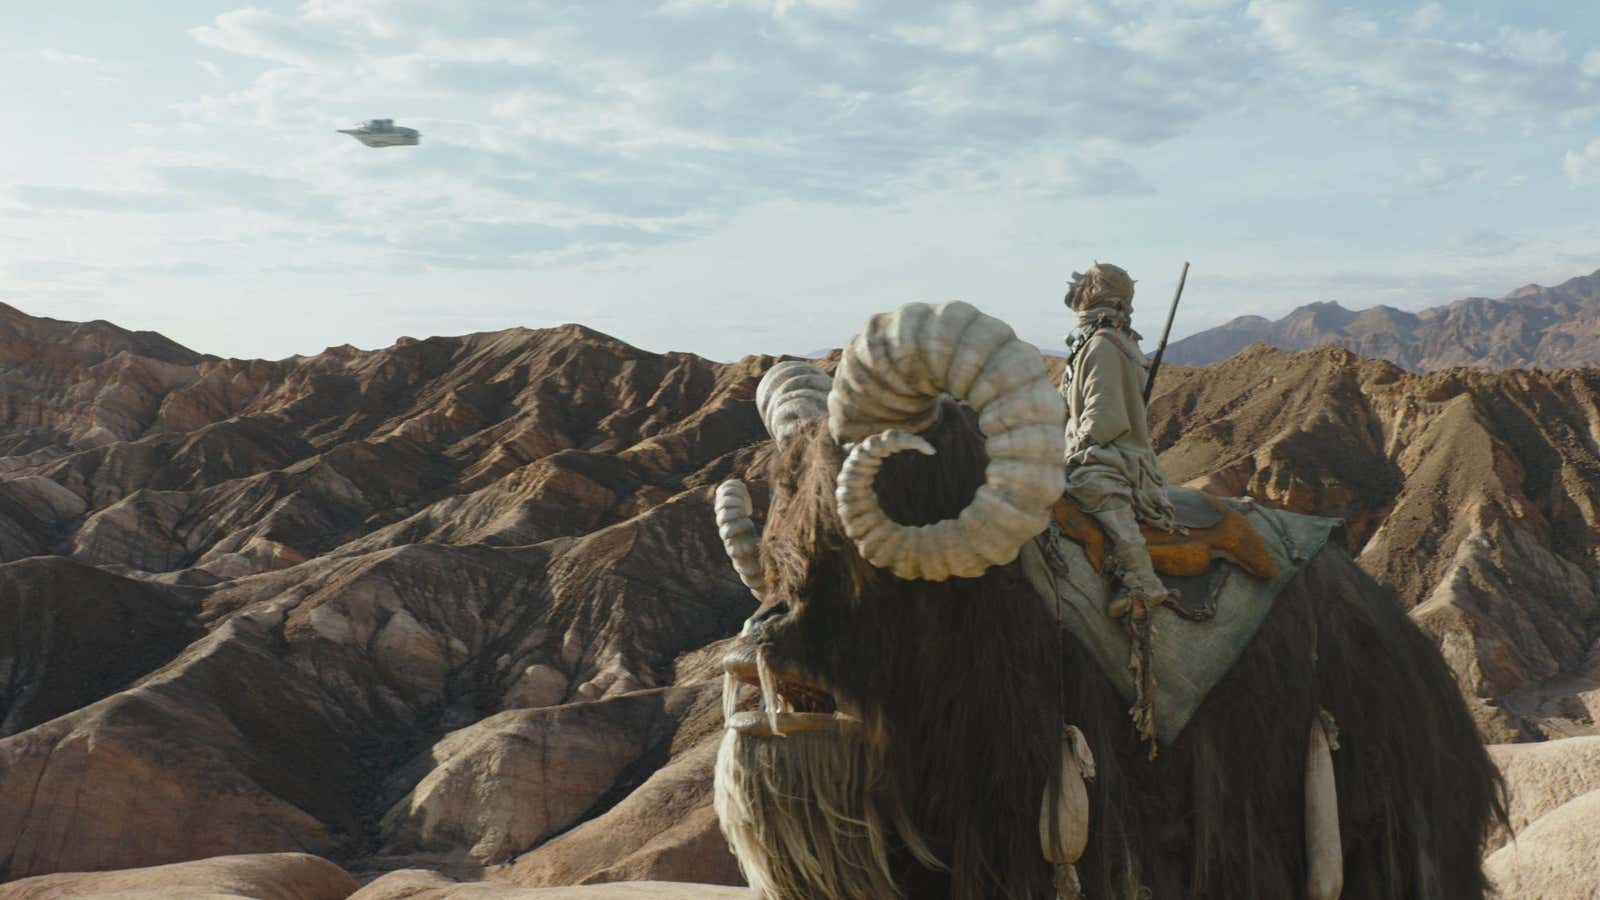 Disney’s Lucasfilm proved the new tech’s potential with “The Mandalorian.”